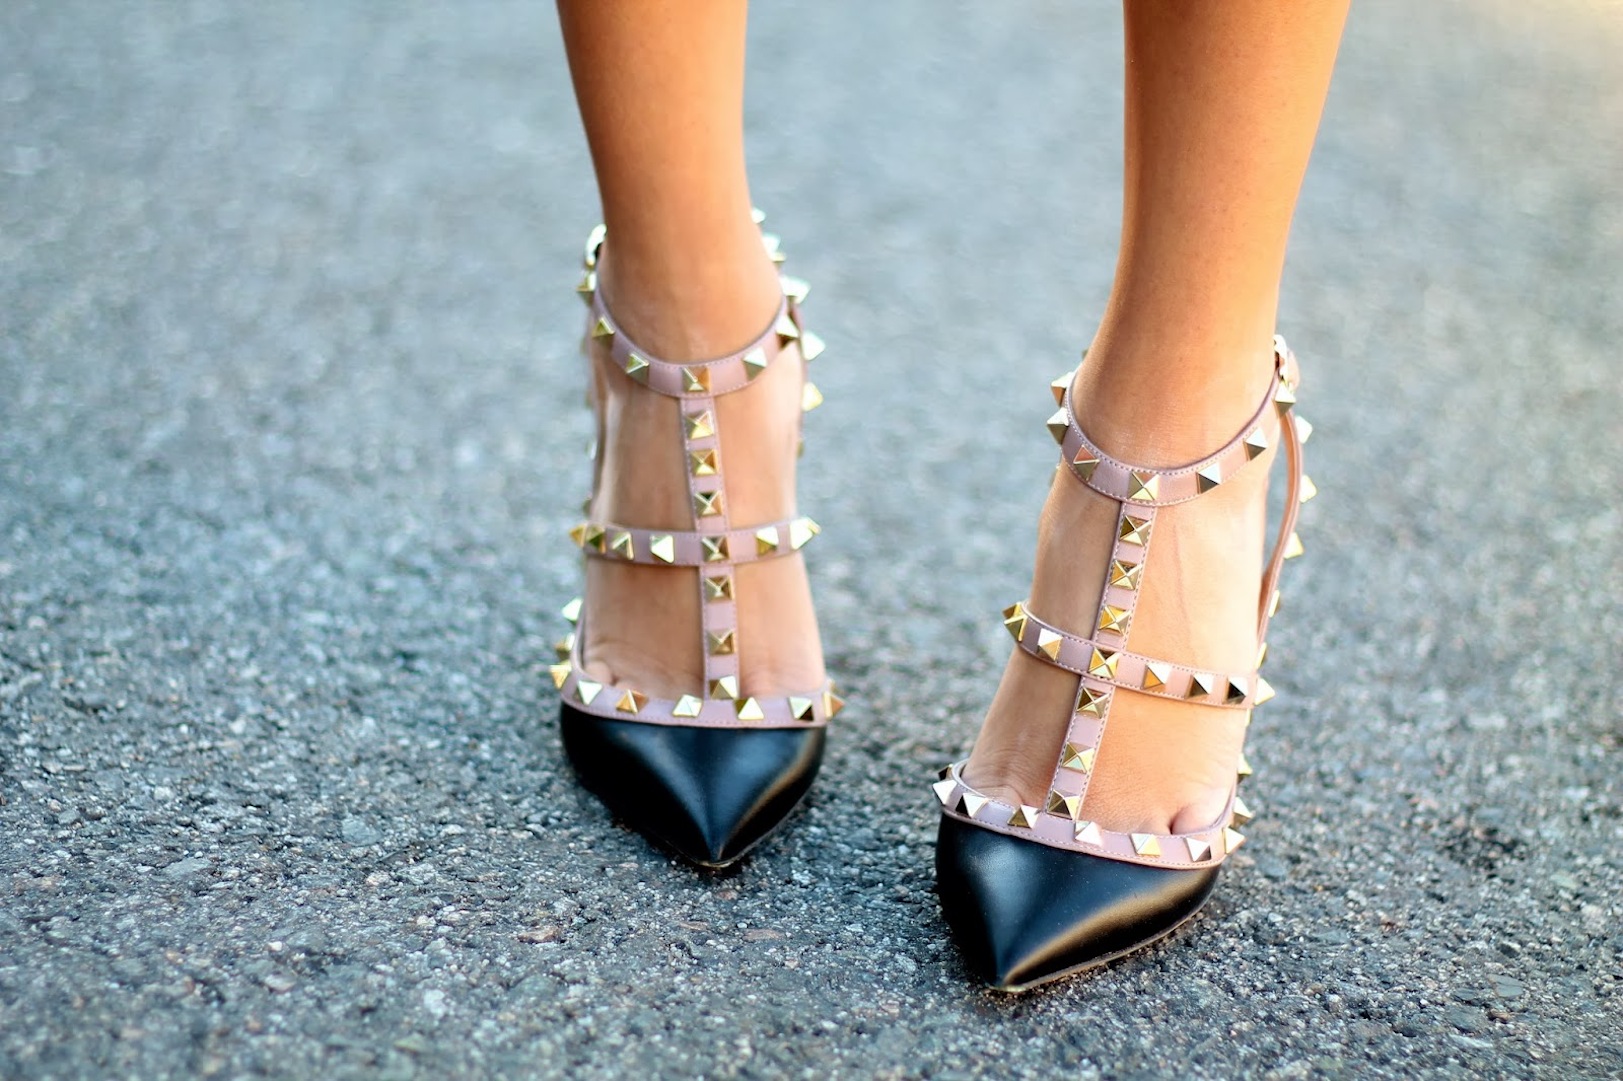 : How can tell Valentino heels are fake?